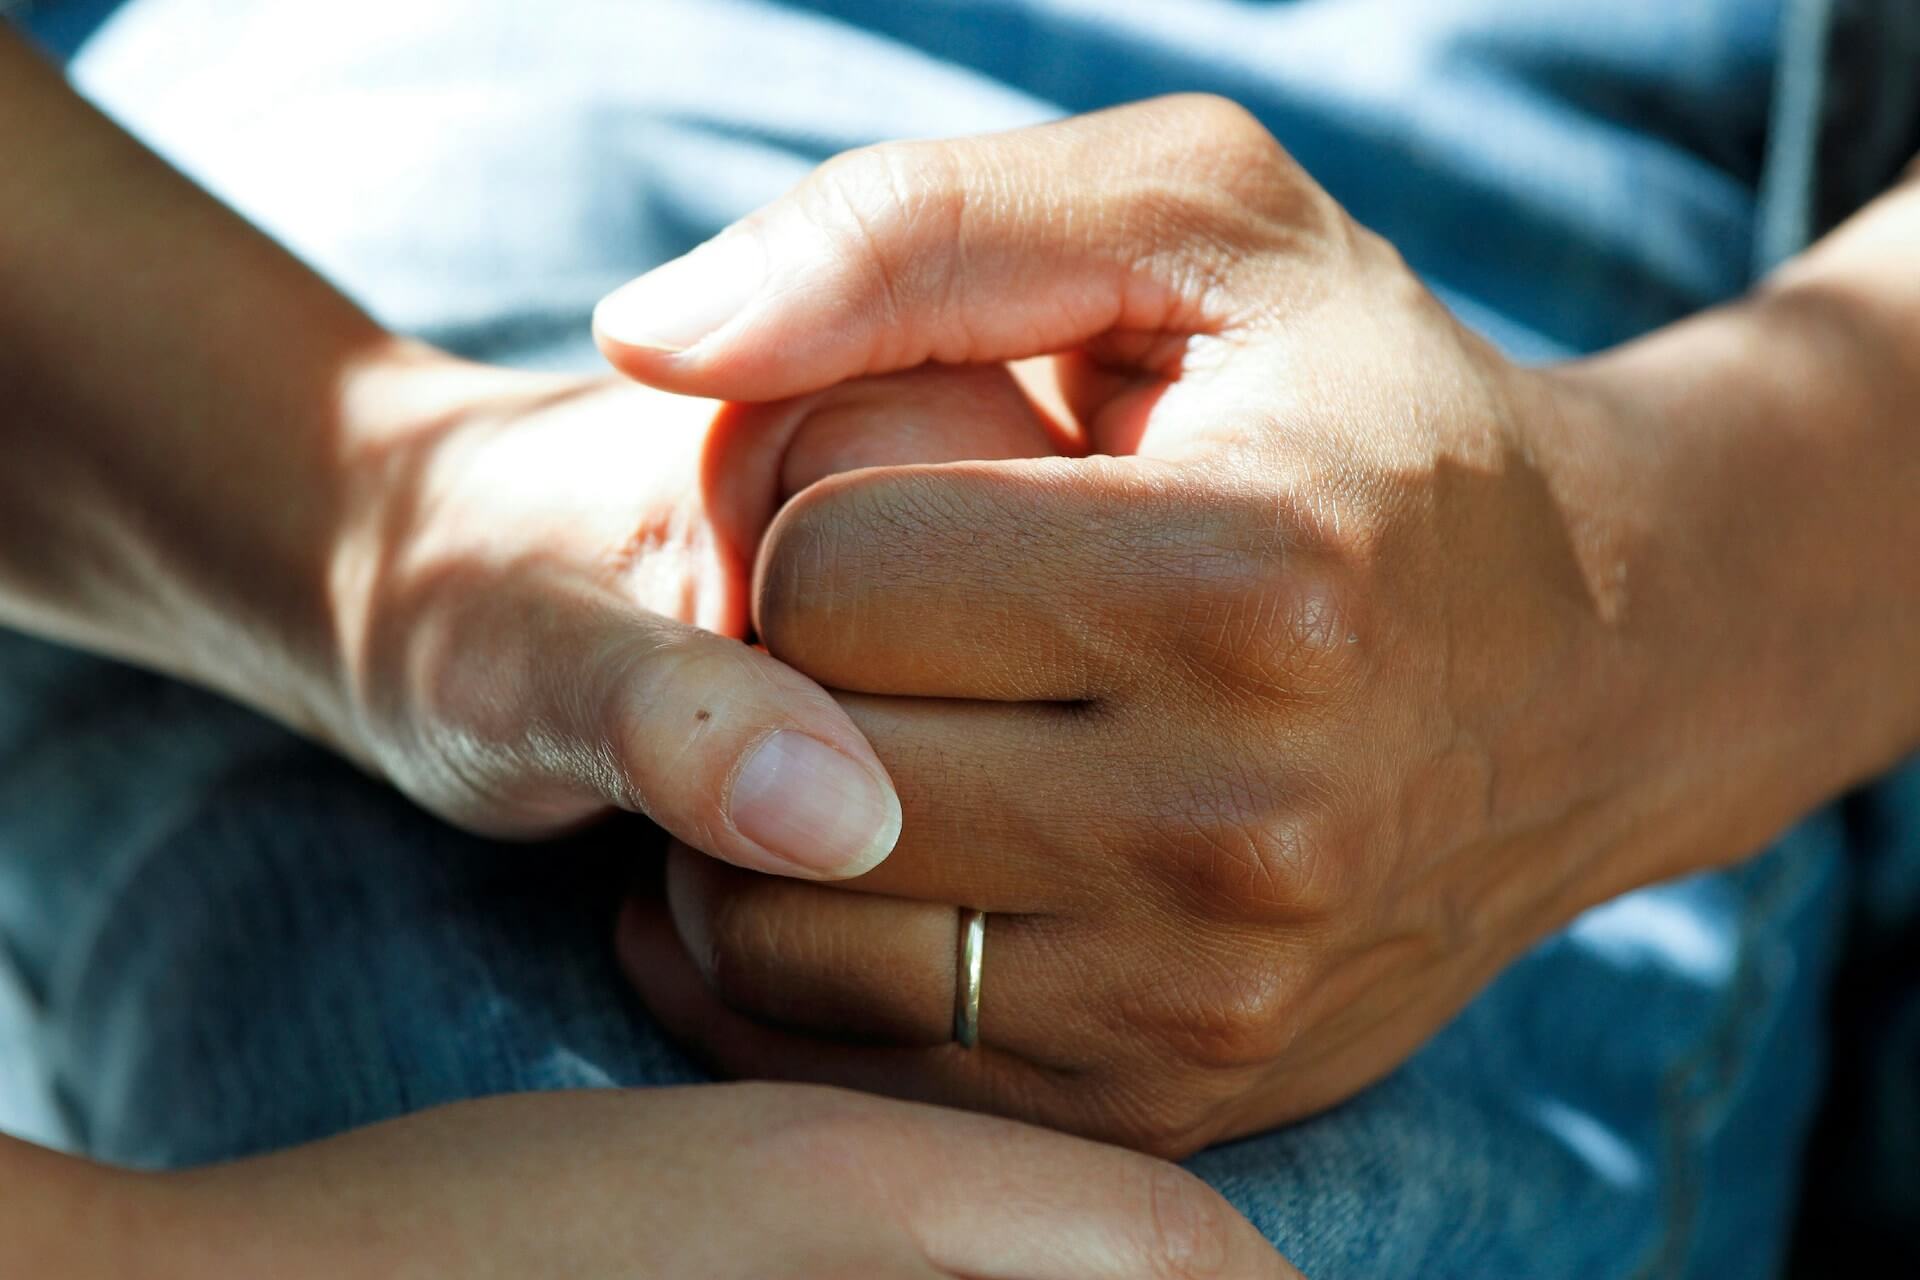 a close up image of the hands of a healthcare professional holding the hand of a patient